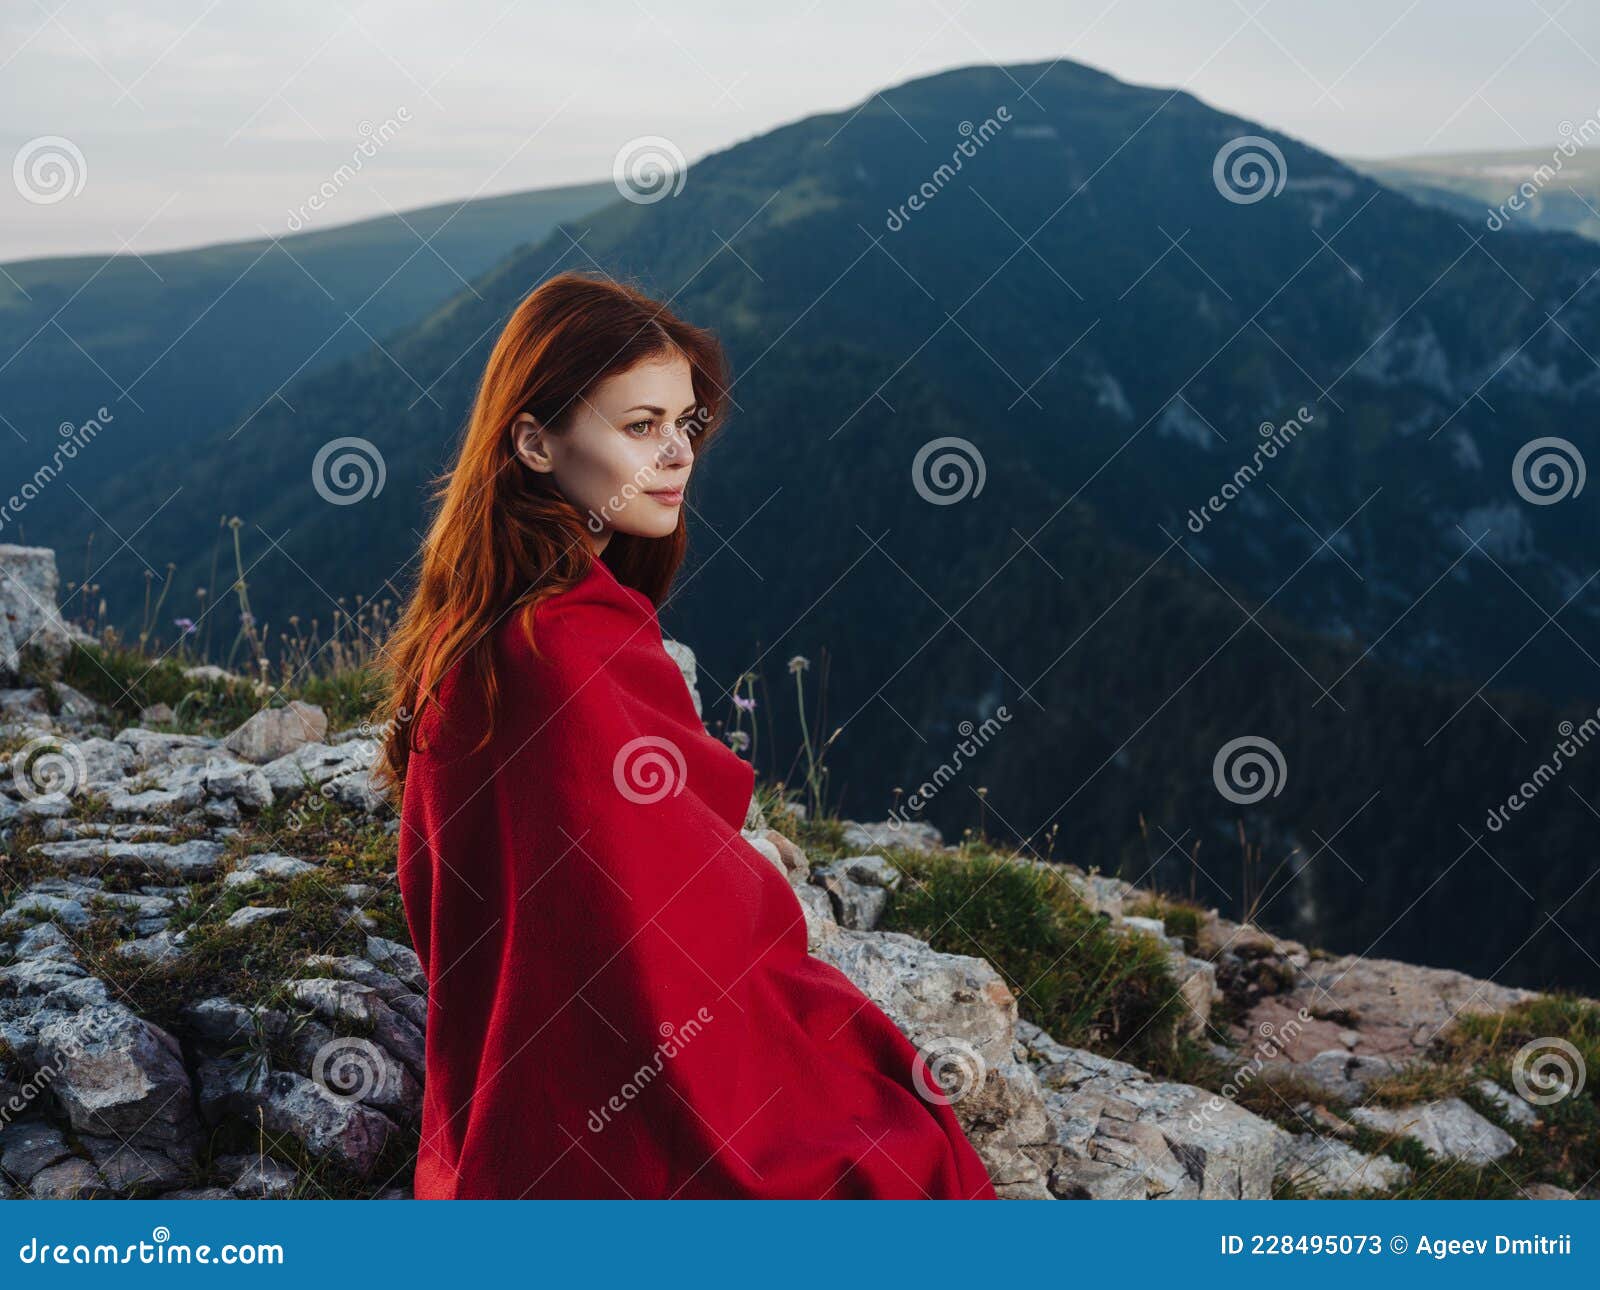 woman in the mountains home nature red plaid cool travel